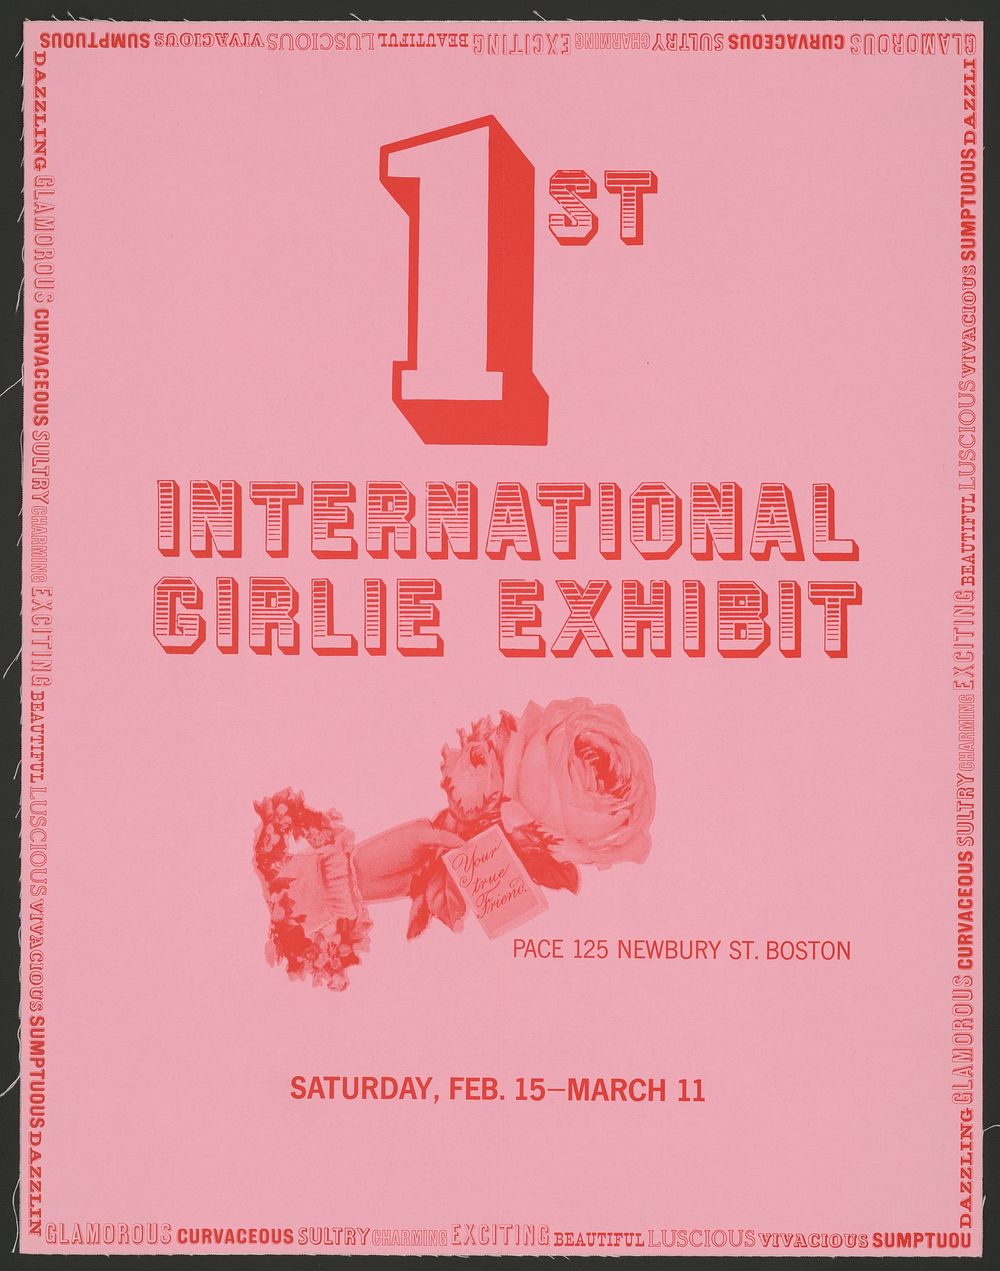 1st international girlie exhibit (1964) vintage poster by Pace Gallery. Original public domain image from the Library of…